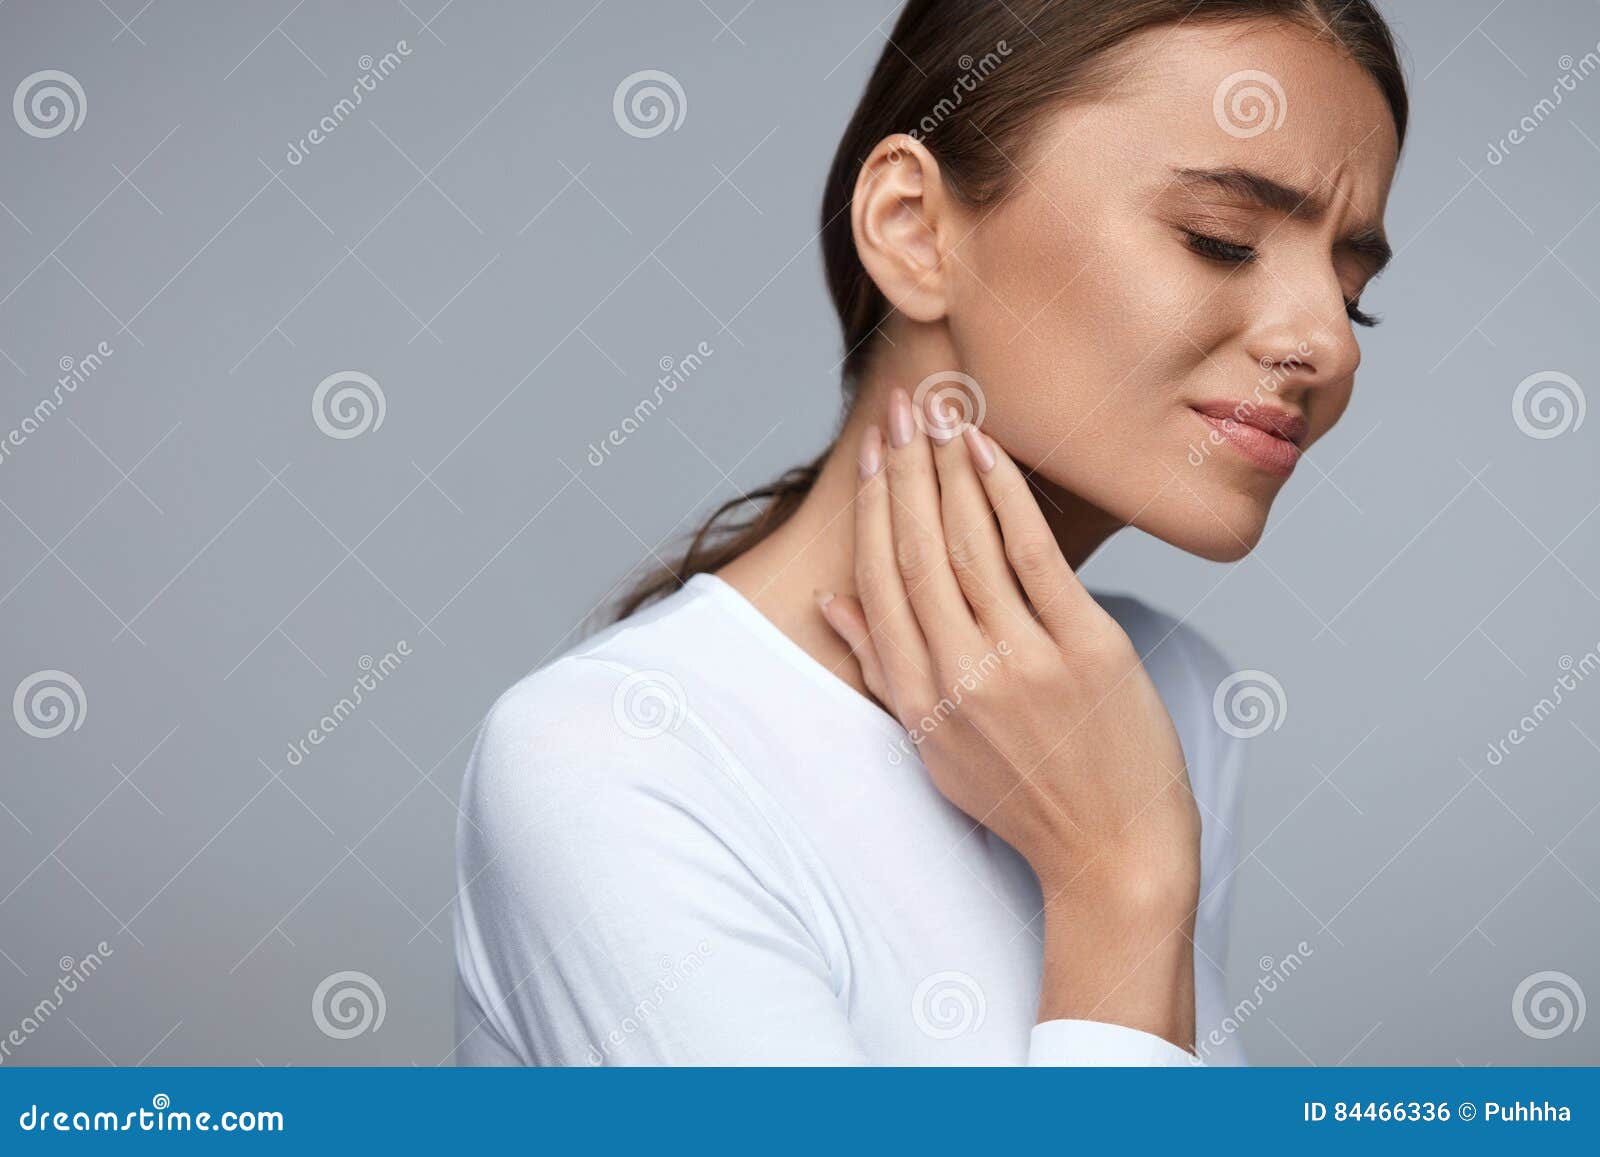 woman in pain. beautiful girl feeling toothache, jaw, neck pain